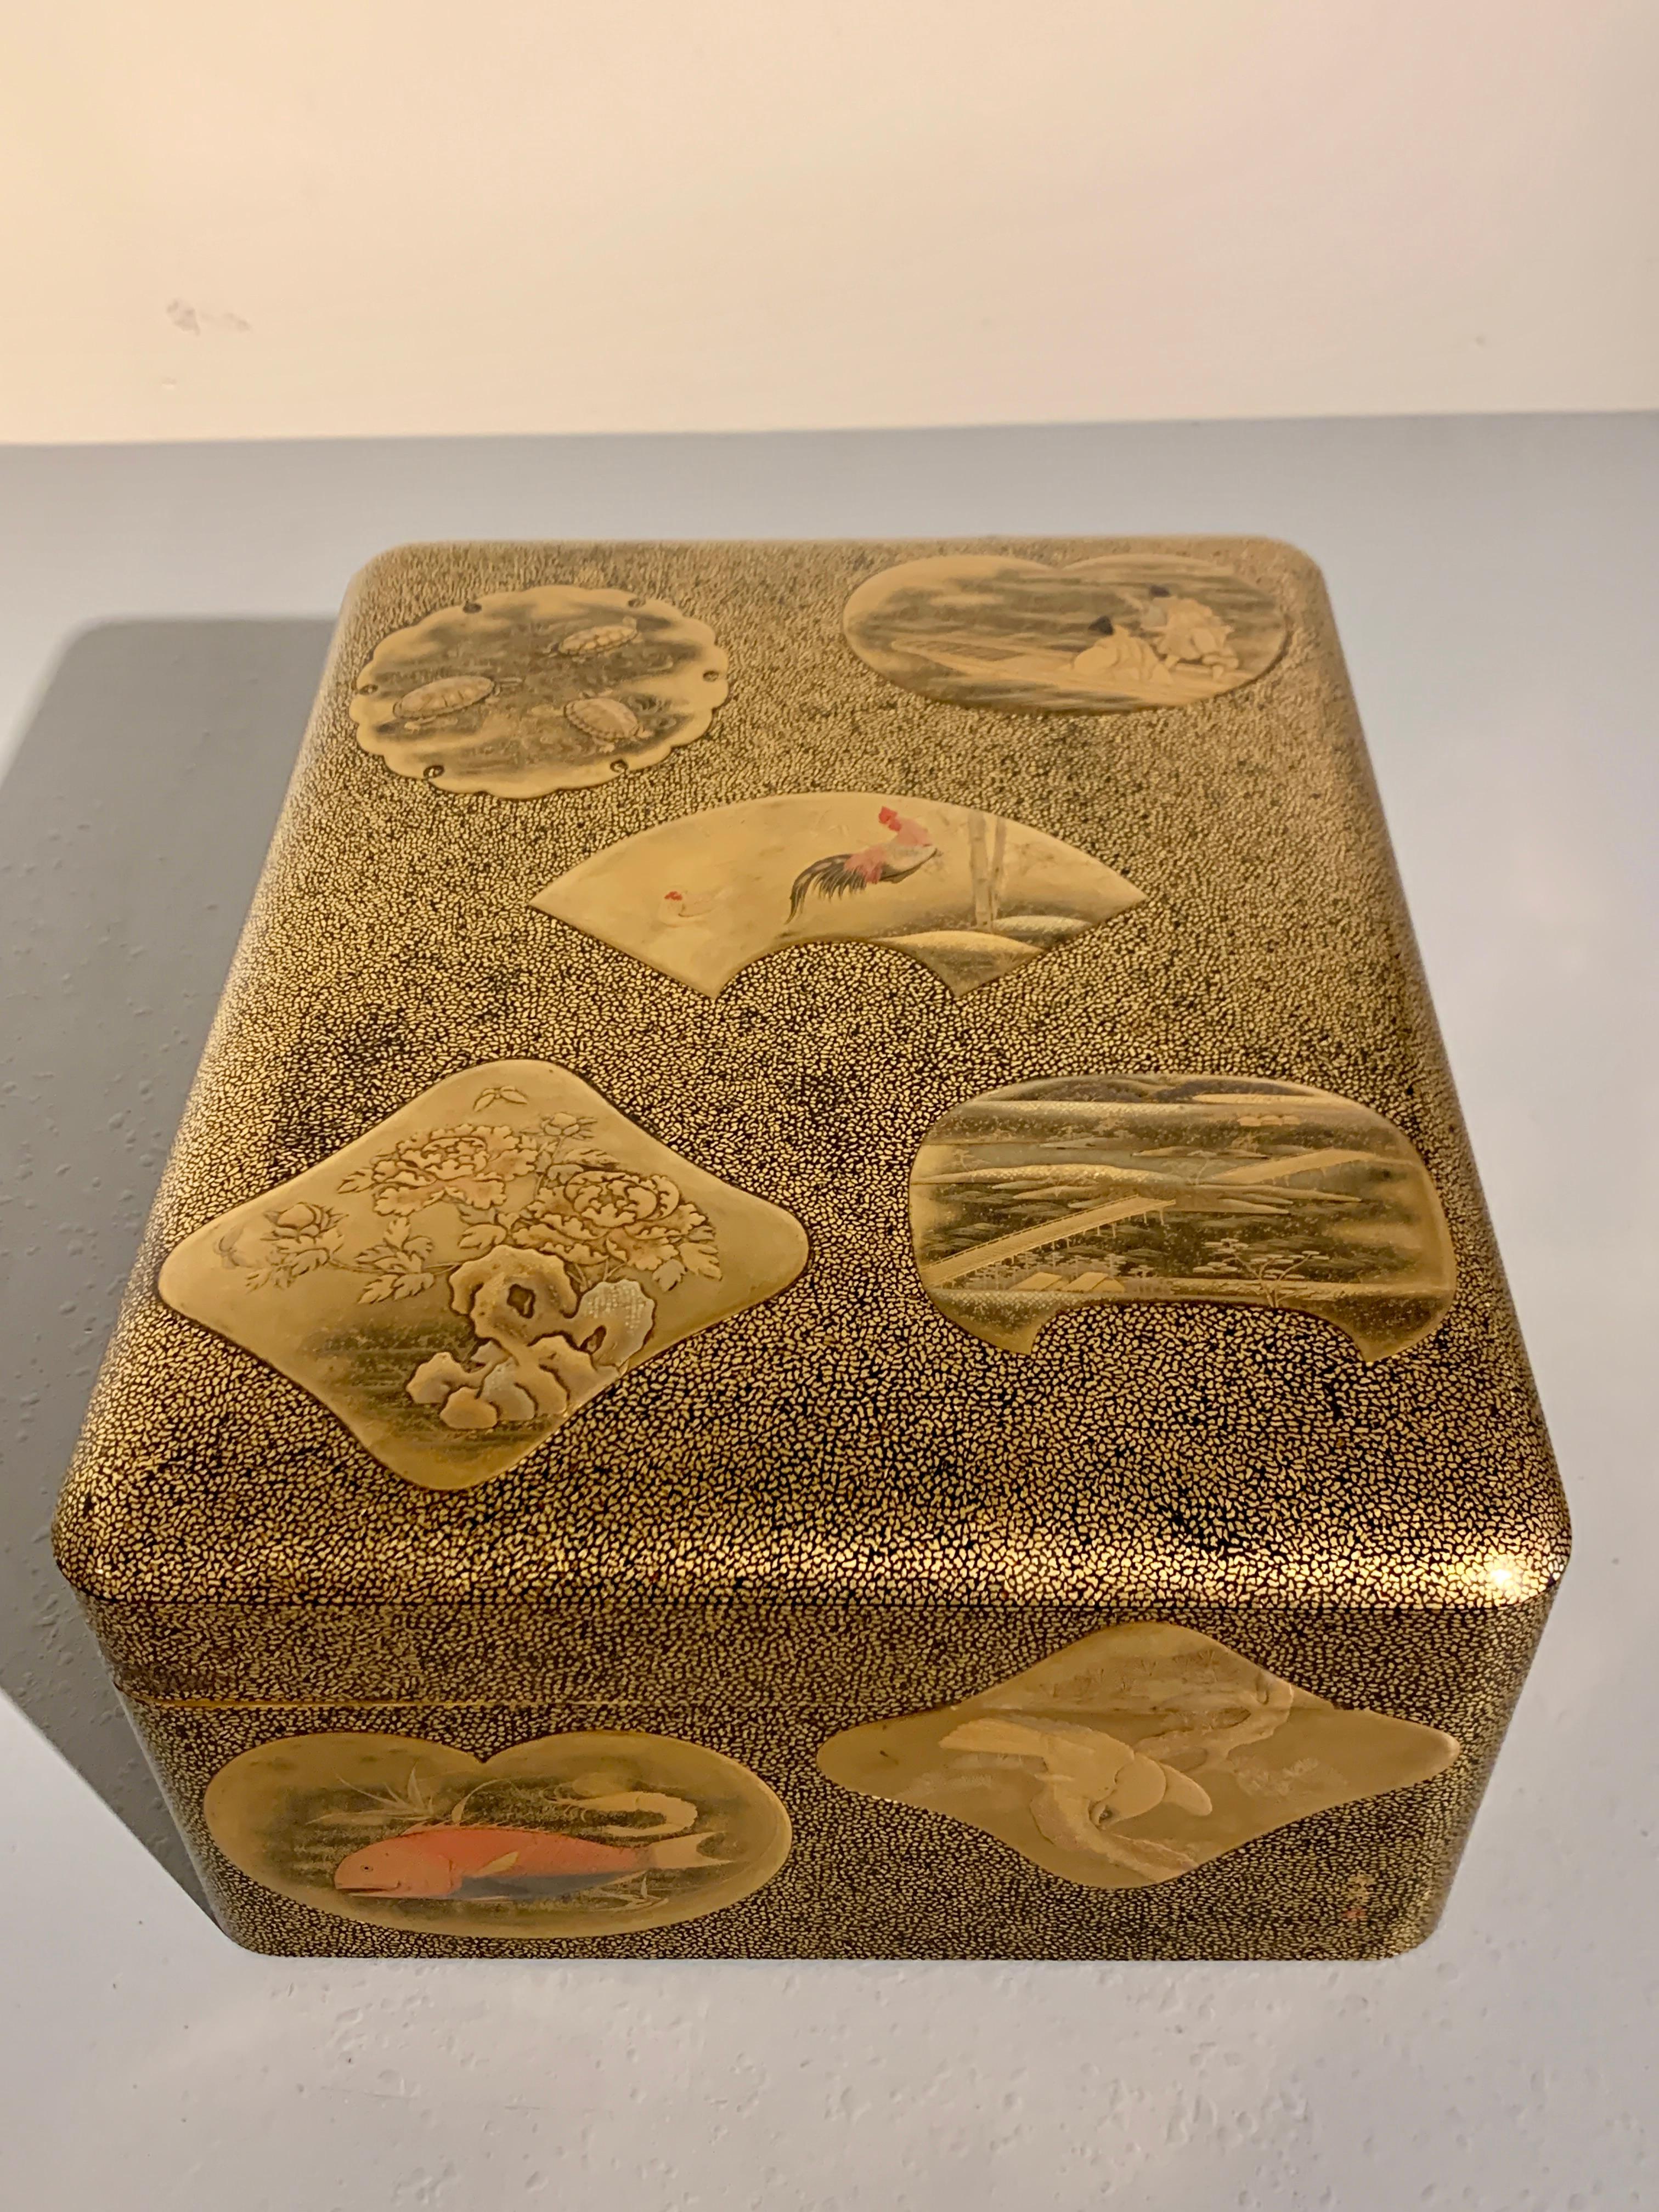 A large and magnificently decorated Japanese lacquer document box, ryoshibako, signed Umeboshi/Baikyo, late Edo or early Meiji Period, mid 19th century, Japan.

The large document box, ryoshibako, of tall, rectangular shape with rounded corners, and